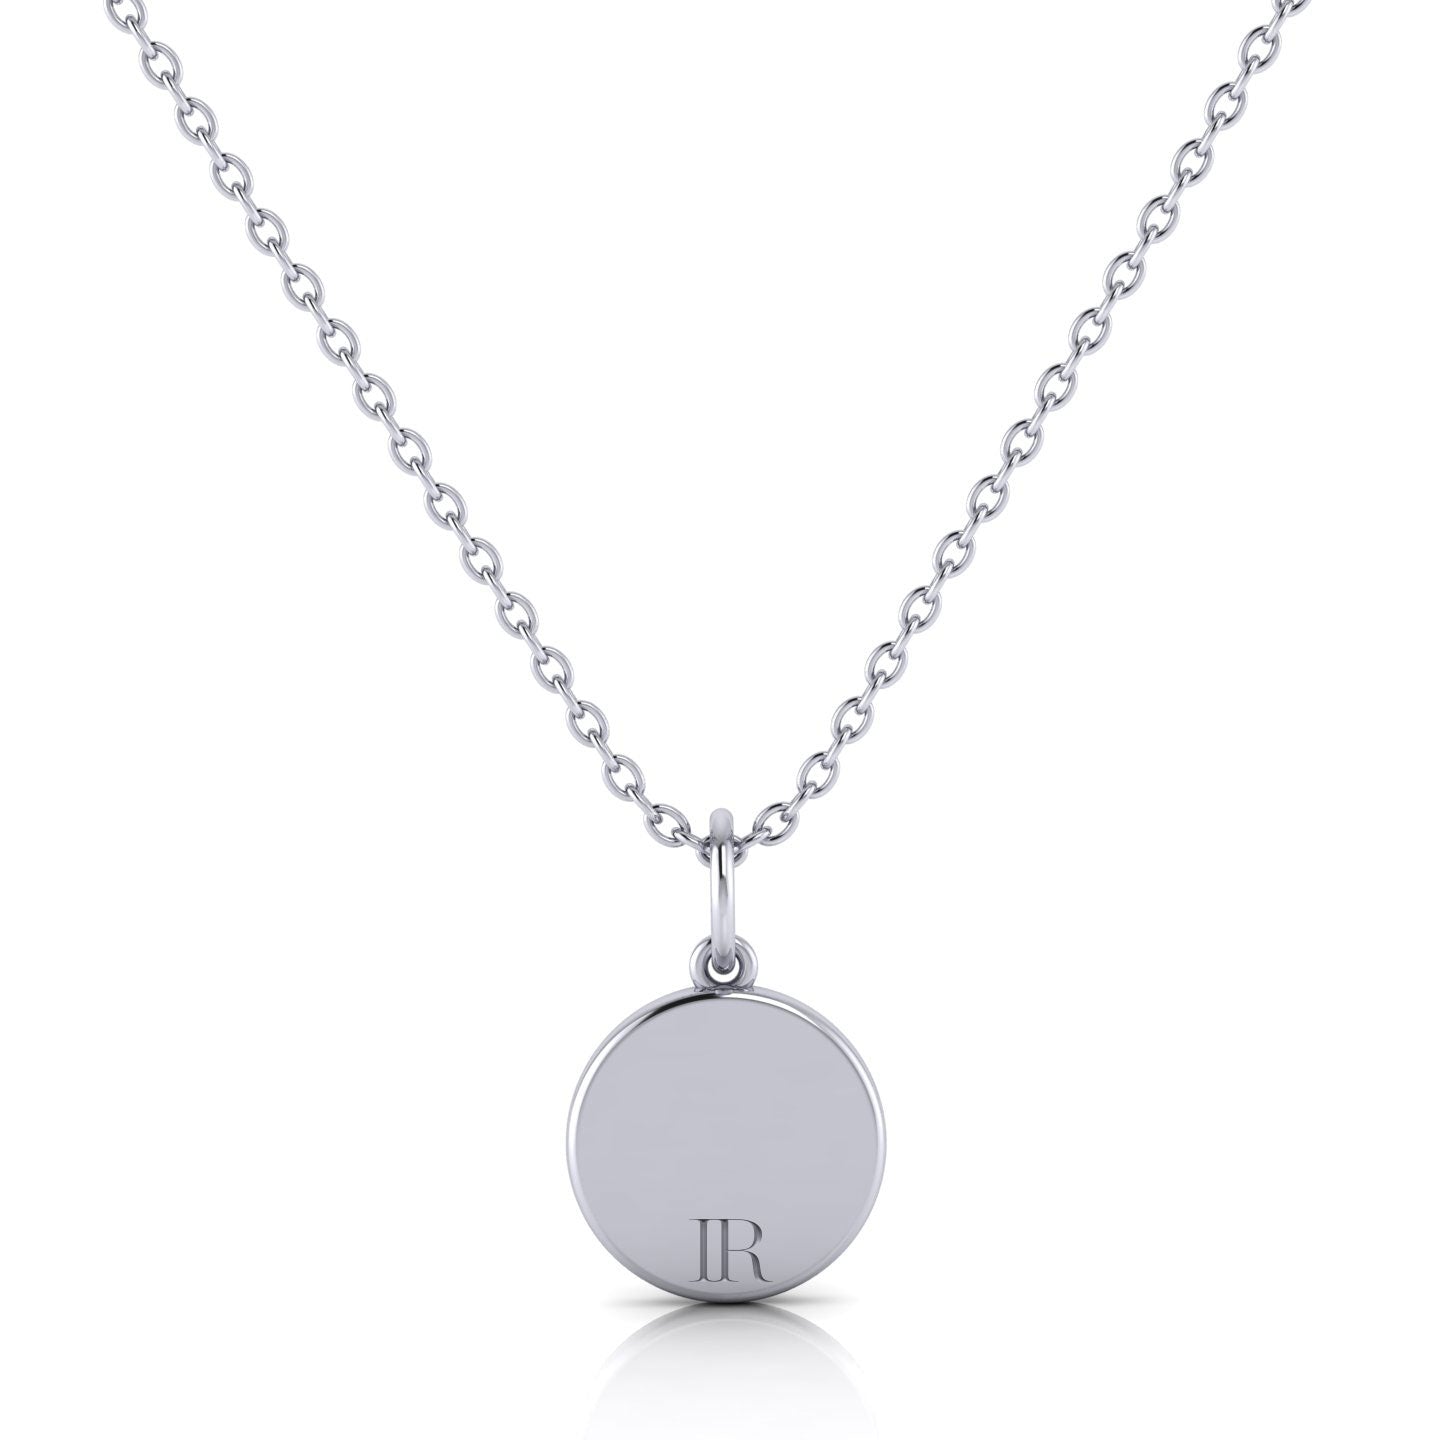 Stanford Small Circle Pendant - Ivy Rhode